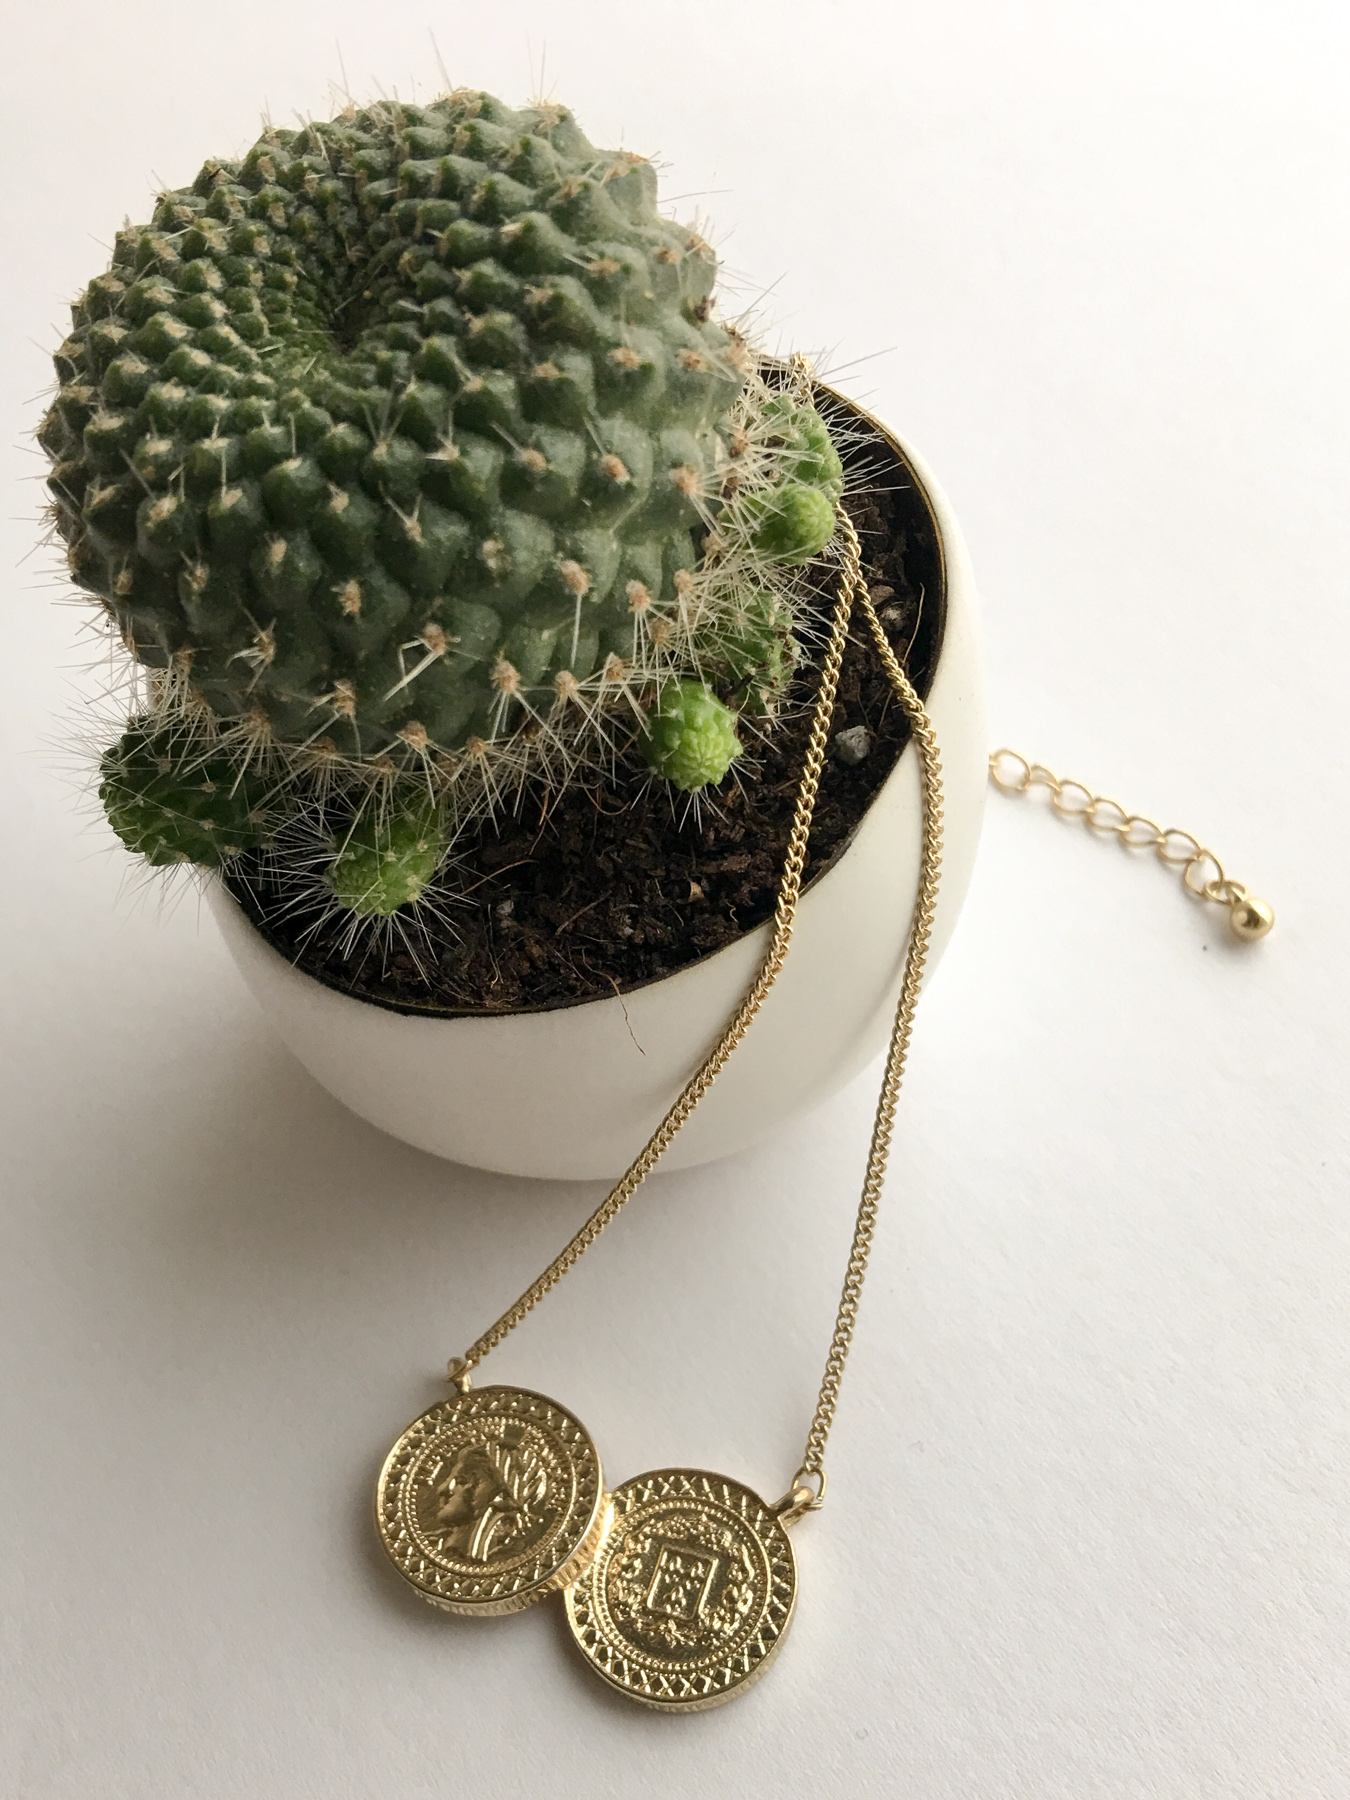 Kate-Spade-Necklace-and-Cactus.jpg